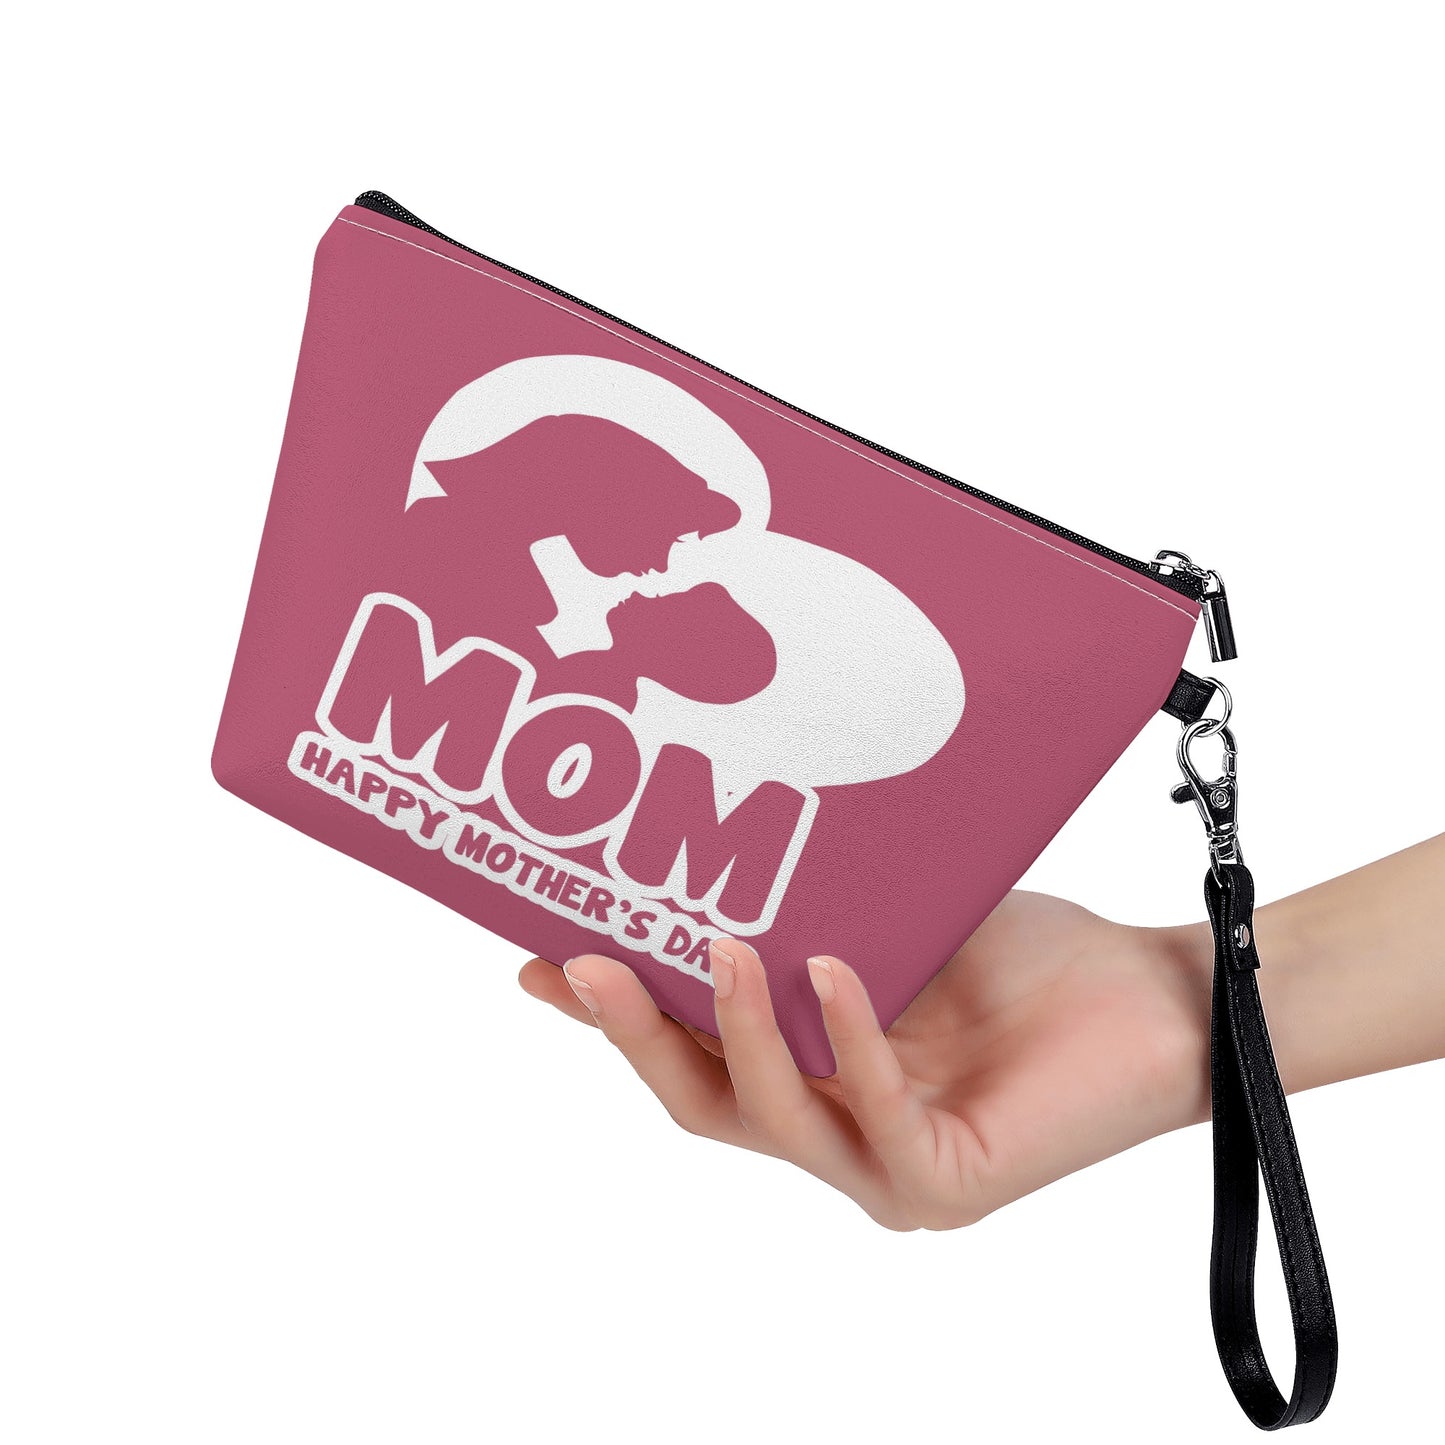 Mothers Need To Stay Organized with this Sling Cosmetic Bag